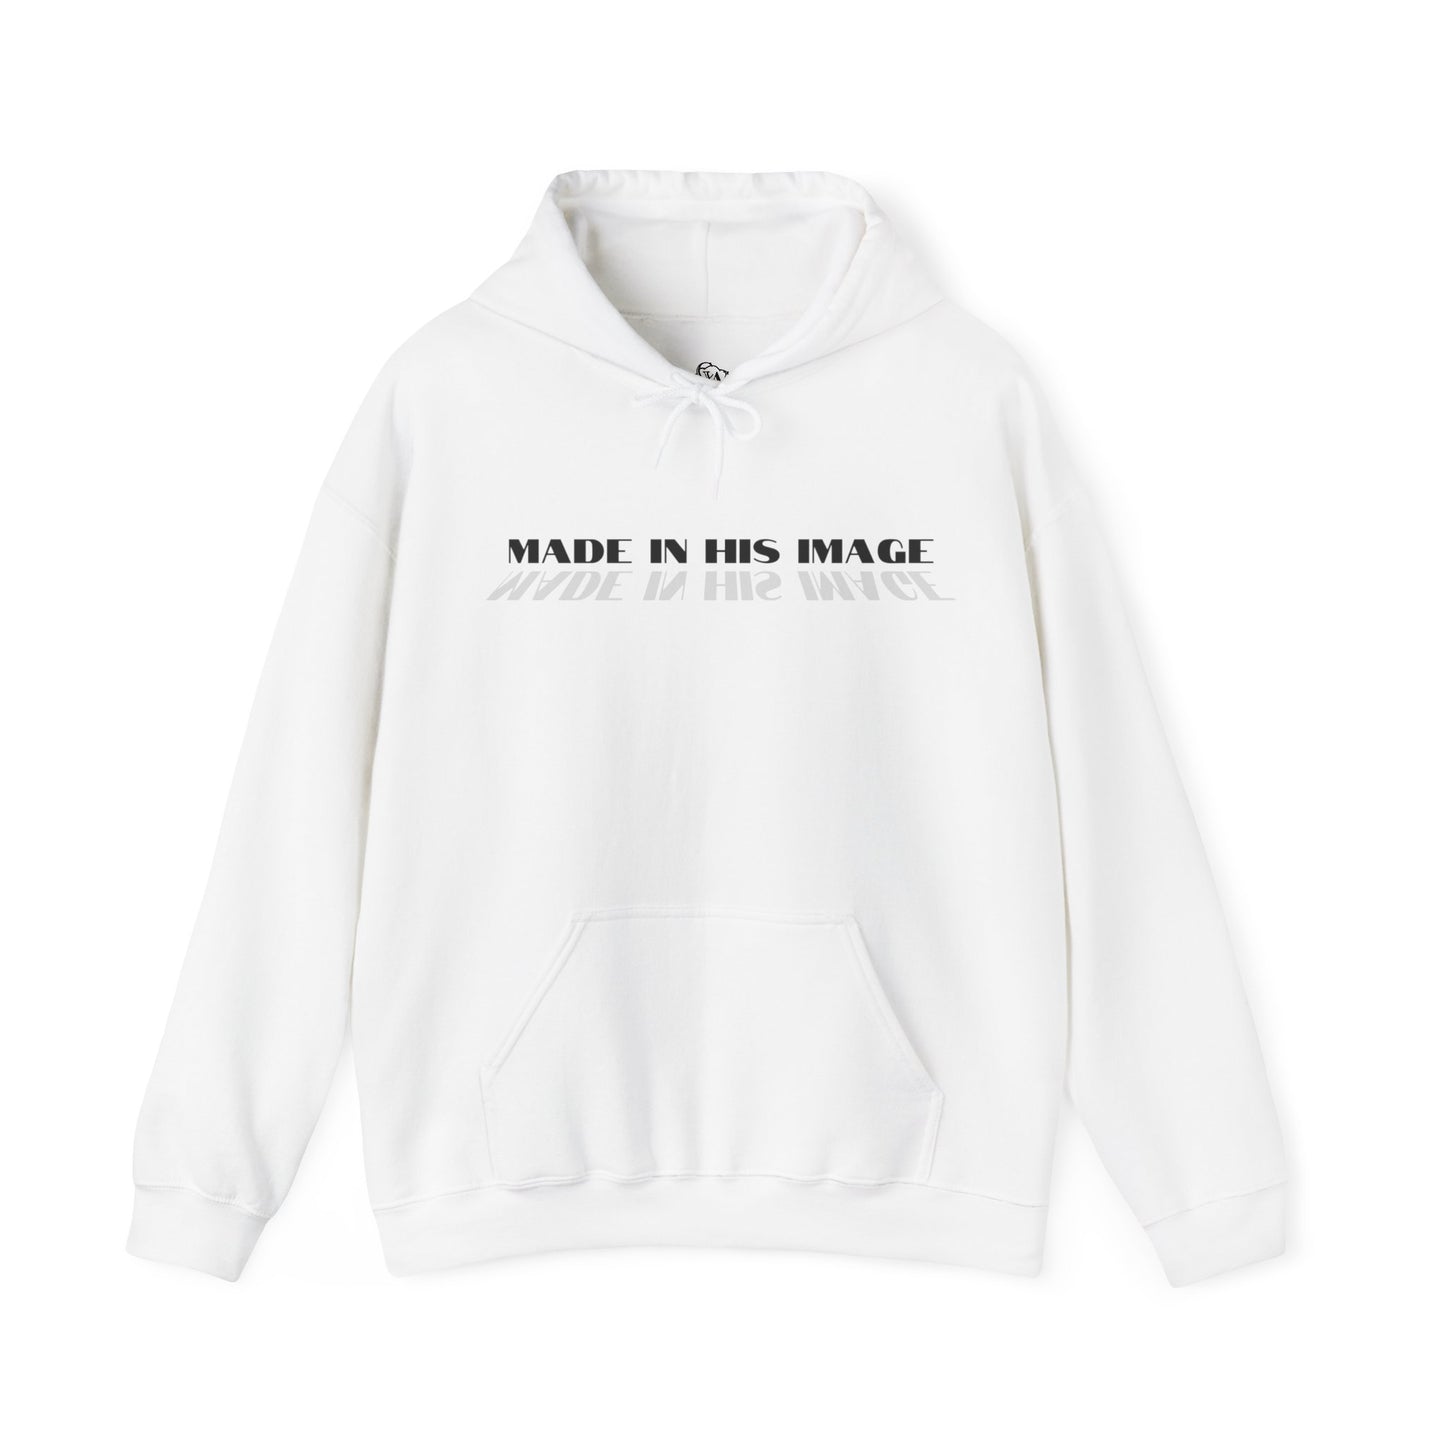 Made in His Image Hoodie